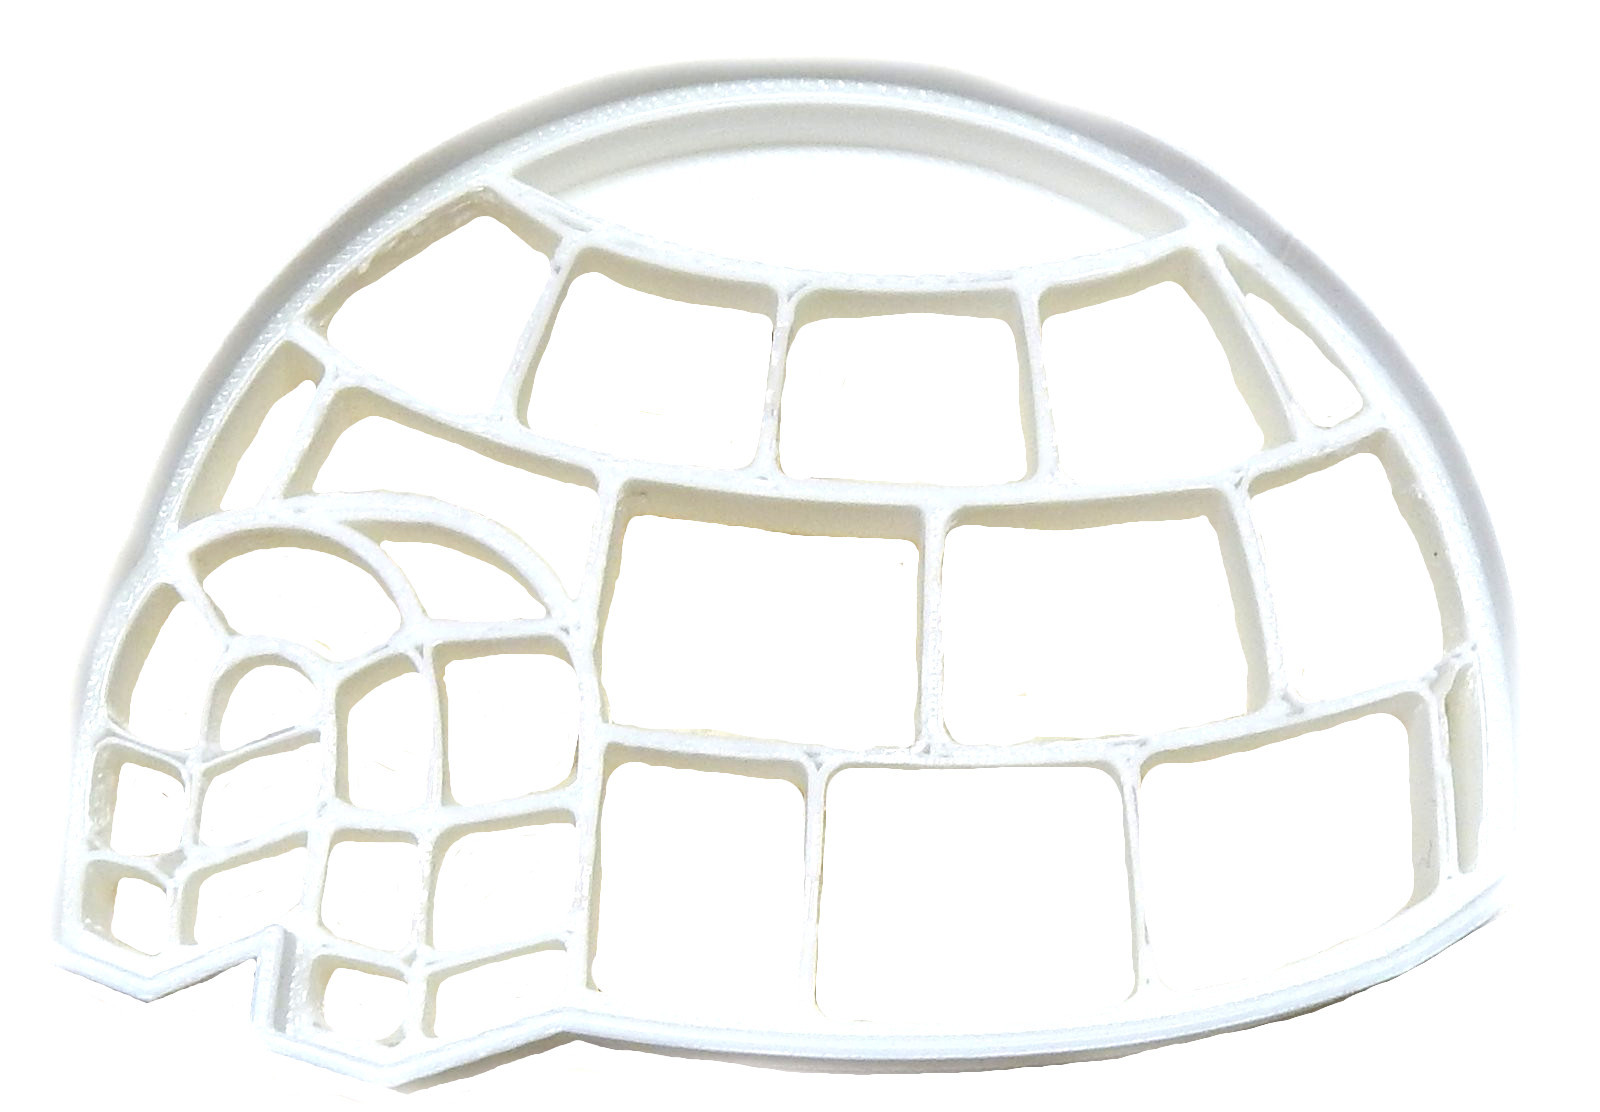 Igloo Blocks Snow Ice Cold Winter Shelter Cookie Cutter Made in USA PR2317 - $3.99